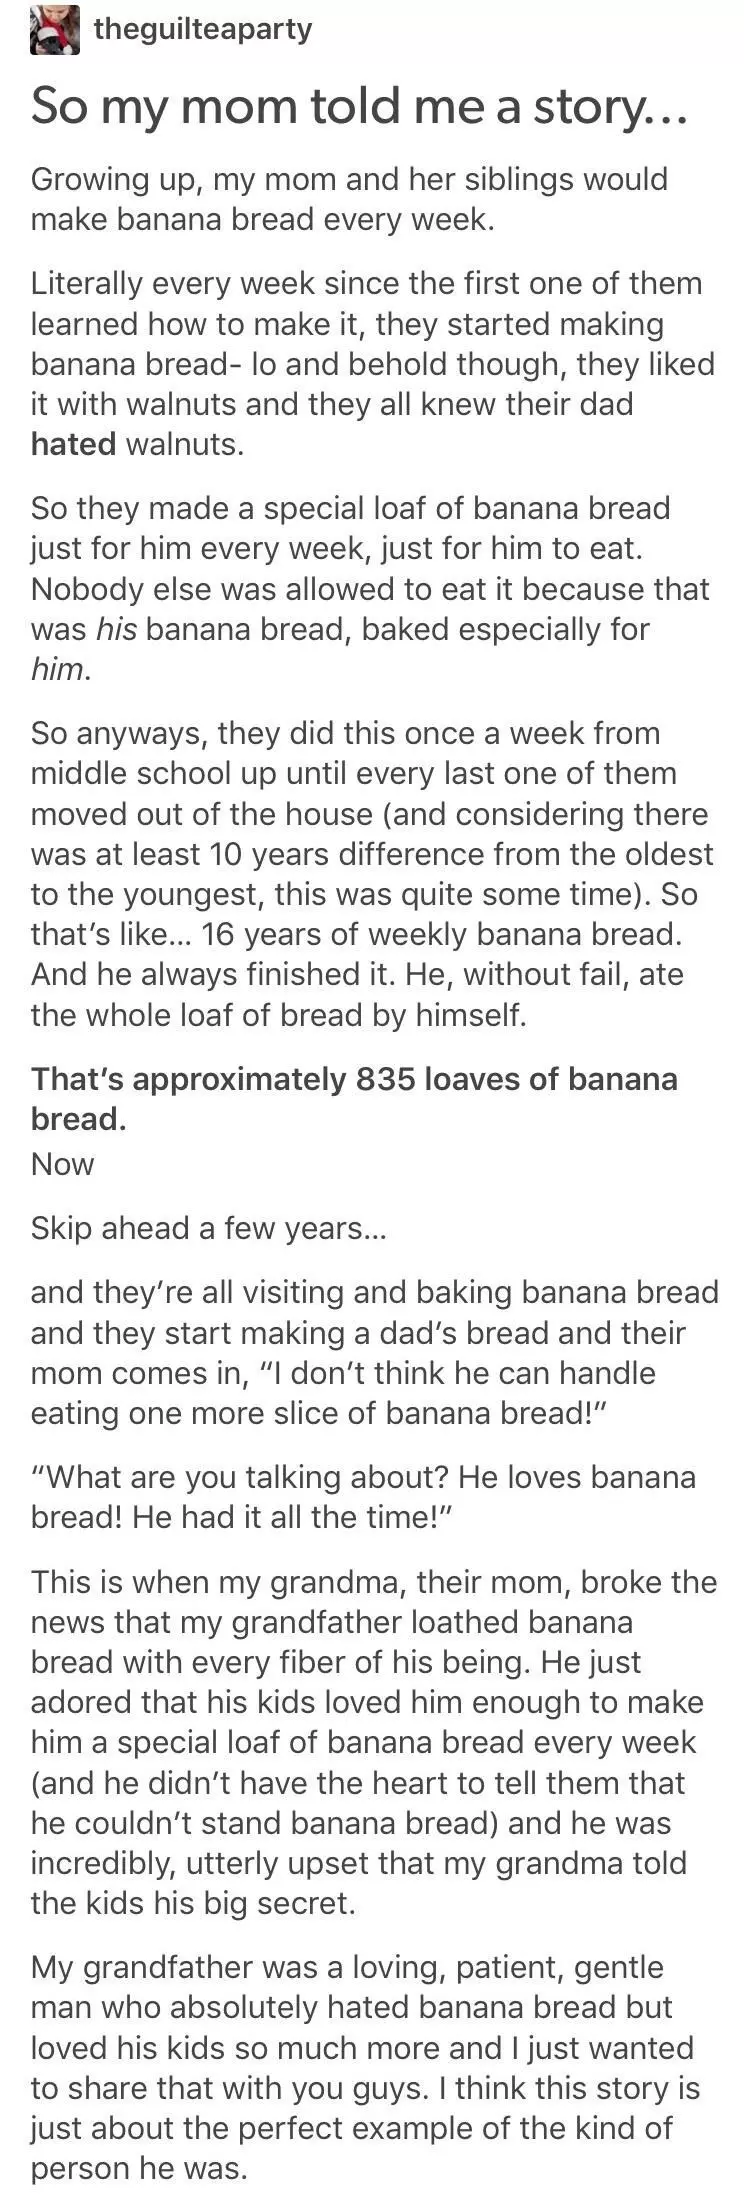 document - theguiteaparty So my mom told me a story... Growing up, my mom and her siblings would ma banana bread every week Liely every since the first one of them learned how to make it, they started making banana breadla and behold though, they led it w